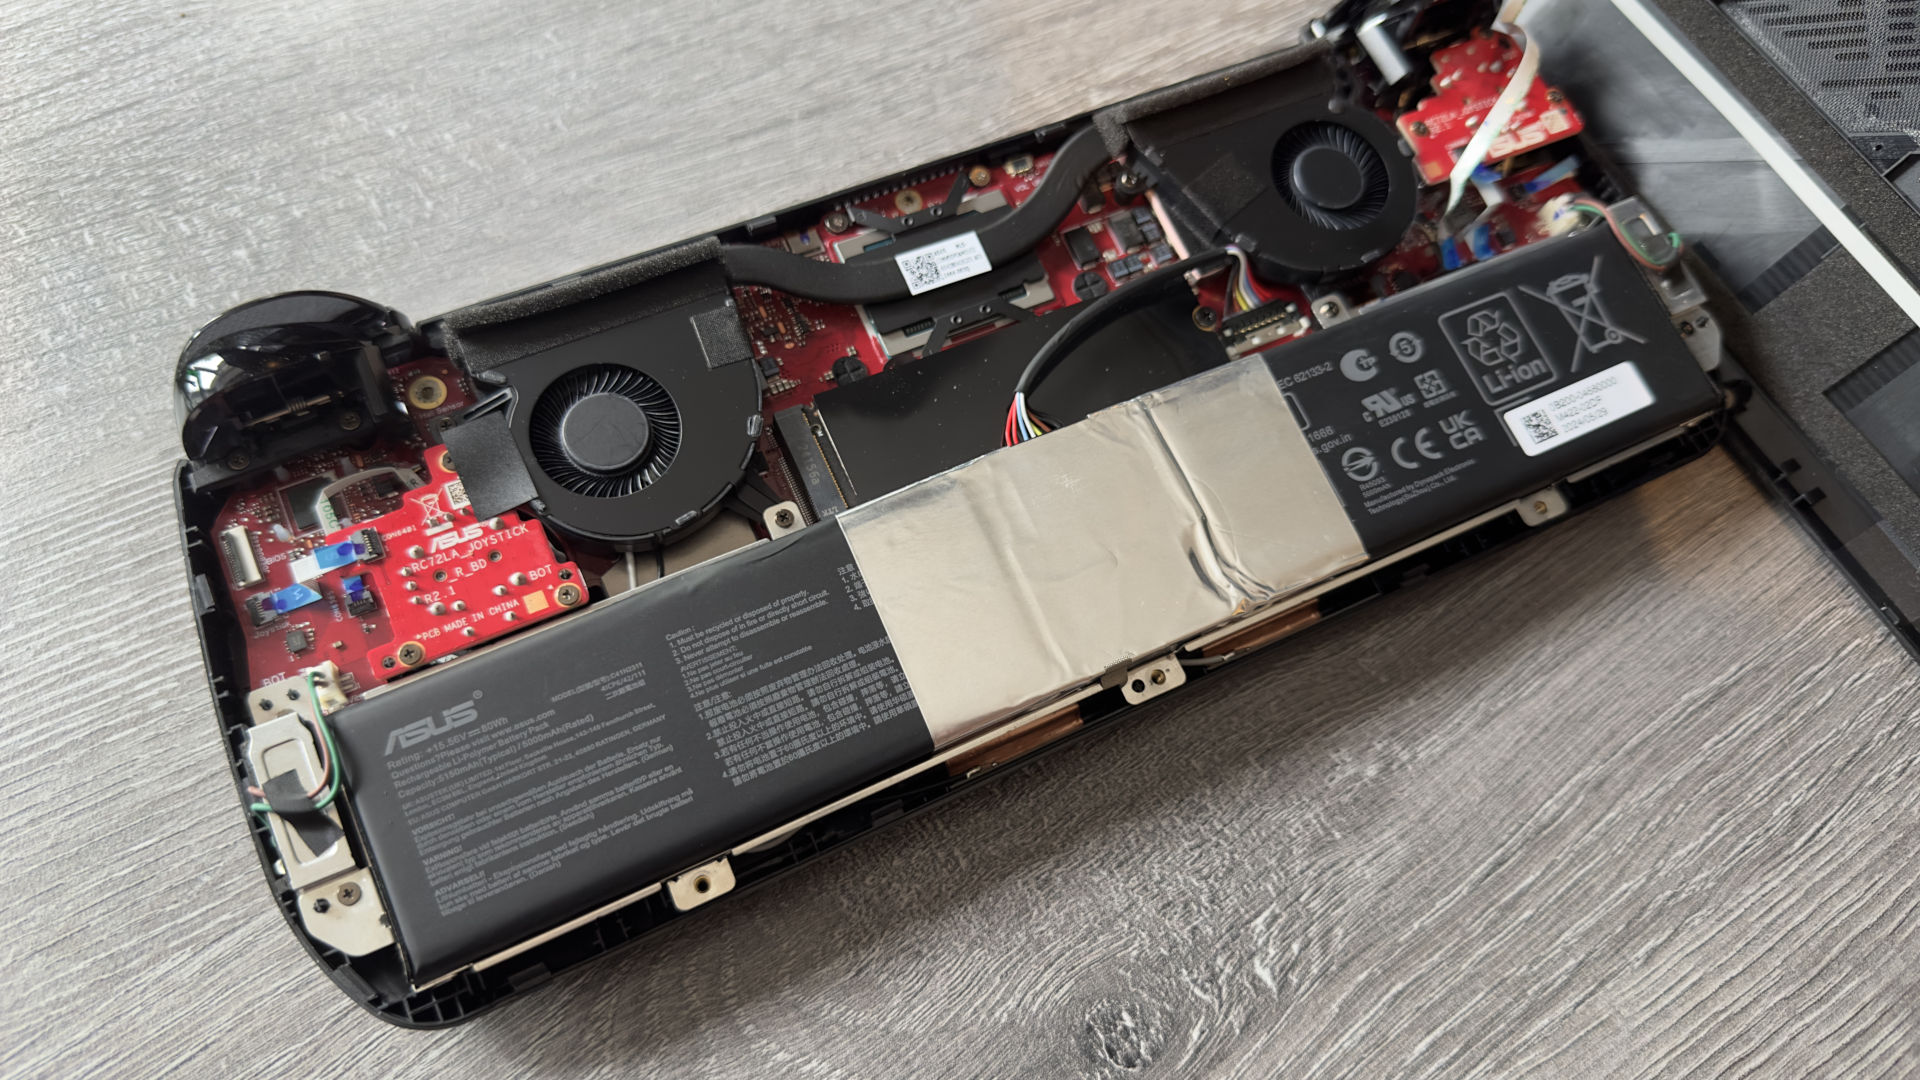 A photo of the interior of an Asus ROG Ally X handheld gaming PC, showing the device's components and layout